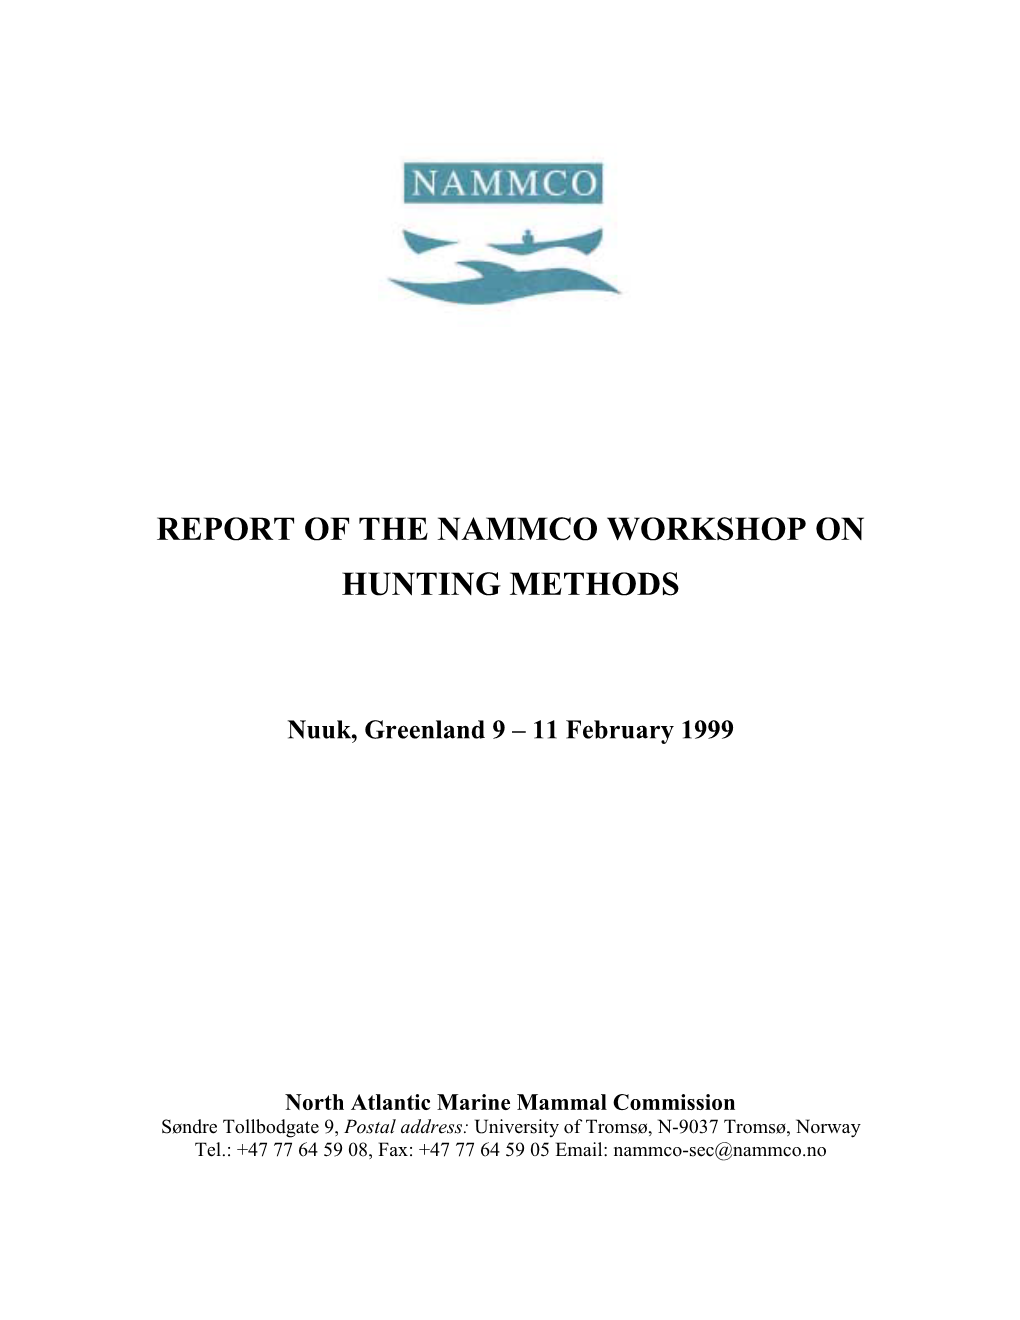 Report of the Workshop on Hunting Methods, February